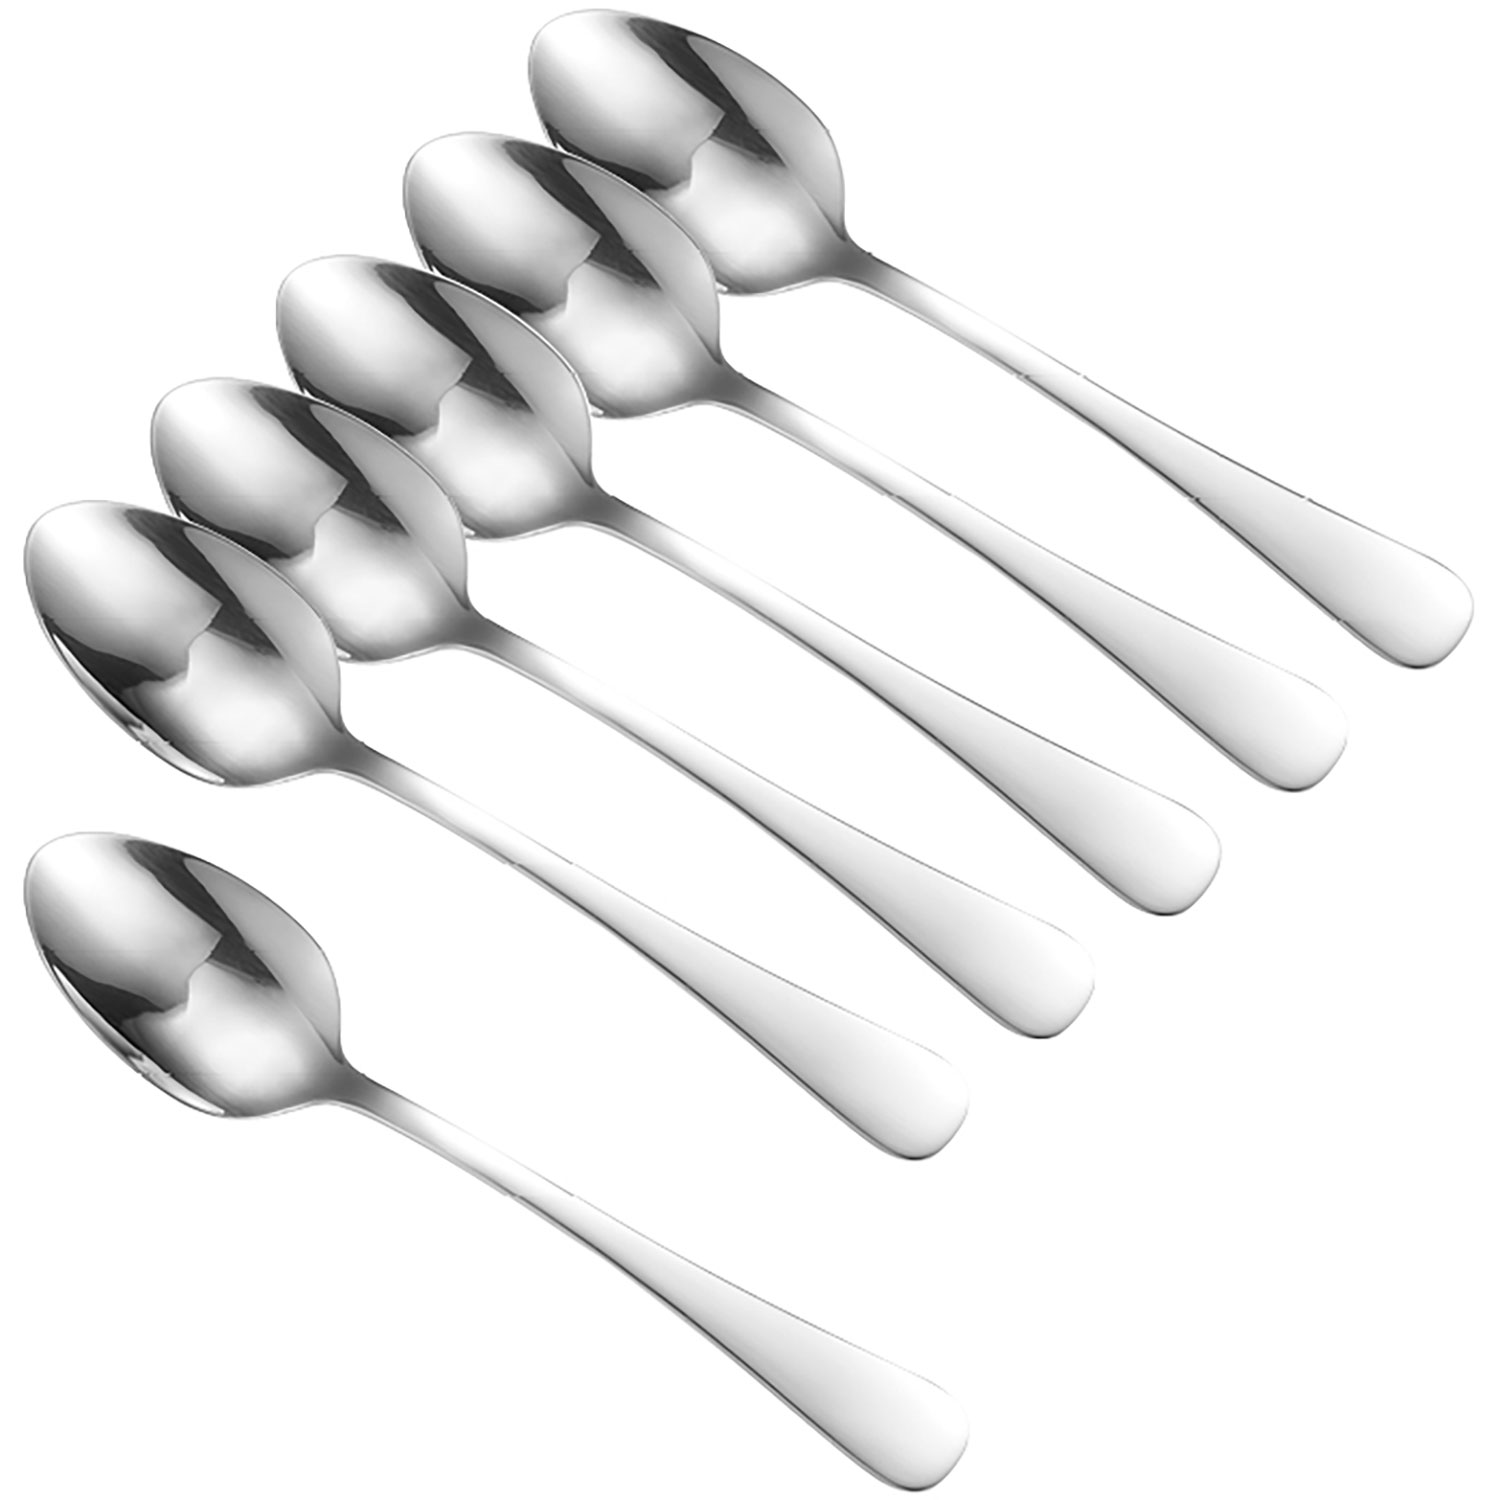 Household Stainless Steel Measuring Spoon Set of Six/6 difference Size  Pieces